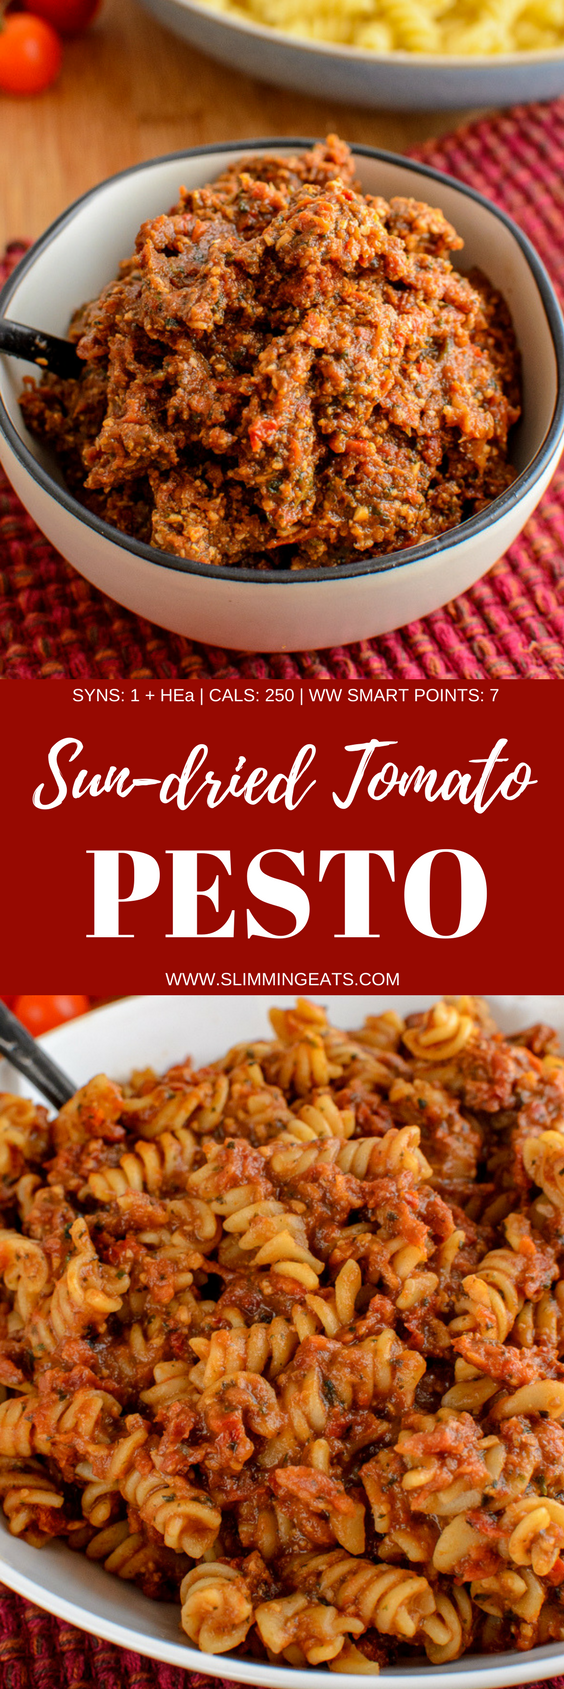 Smother your pasta in this delicious Low Syn Sun-dried Tomato Red Pesto - using your HEa, it's only 1 syn for half the recipe. Gluten Free, Slimming World and Weight Watchers friendly | www.slimmingeats.com